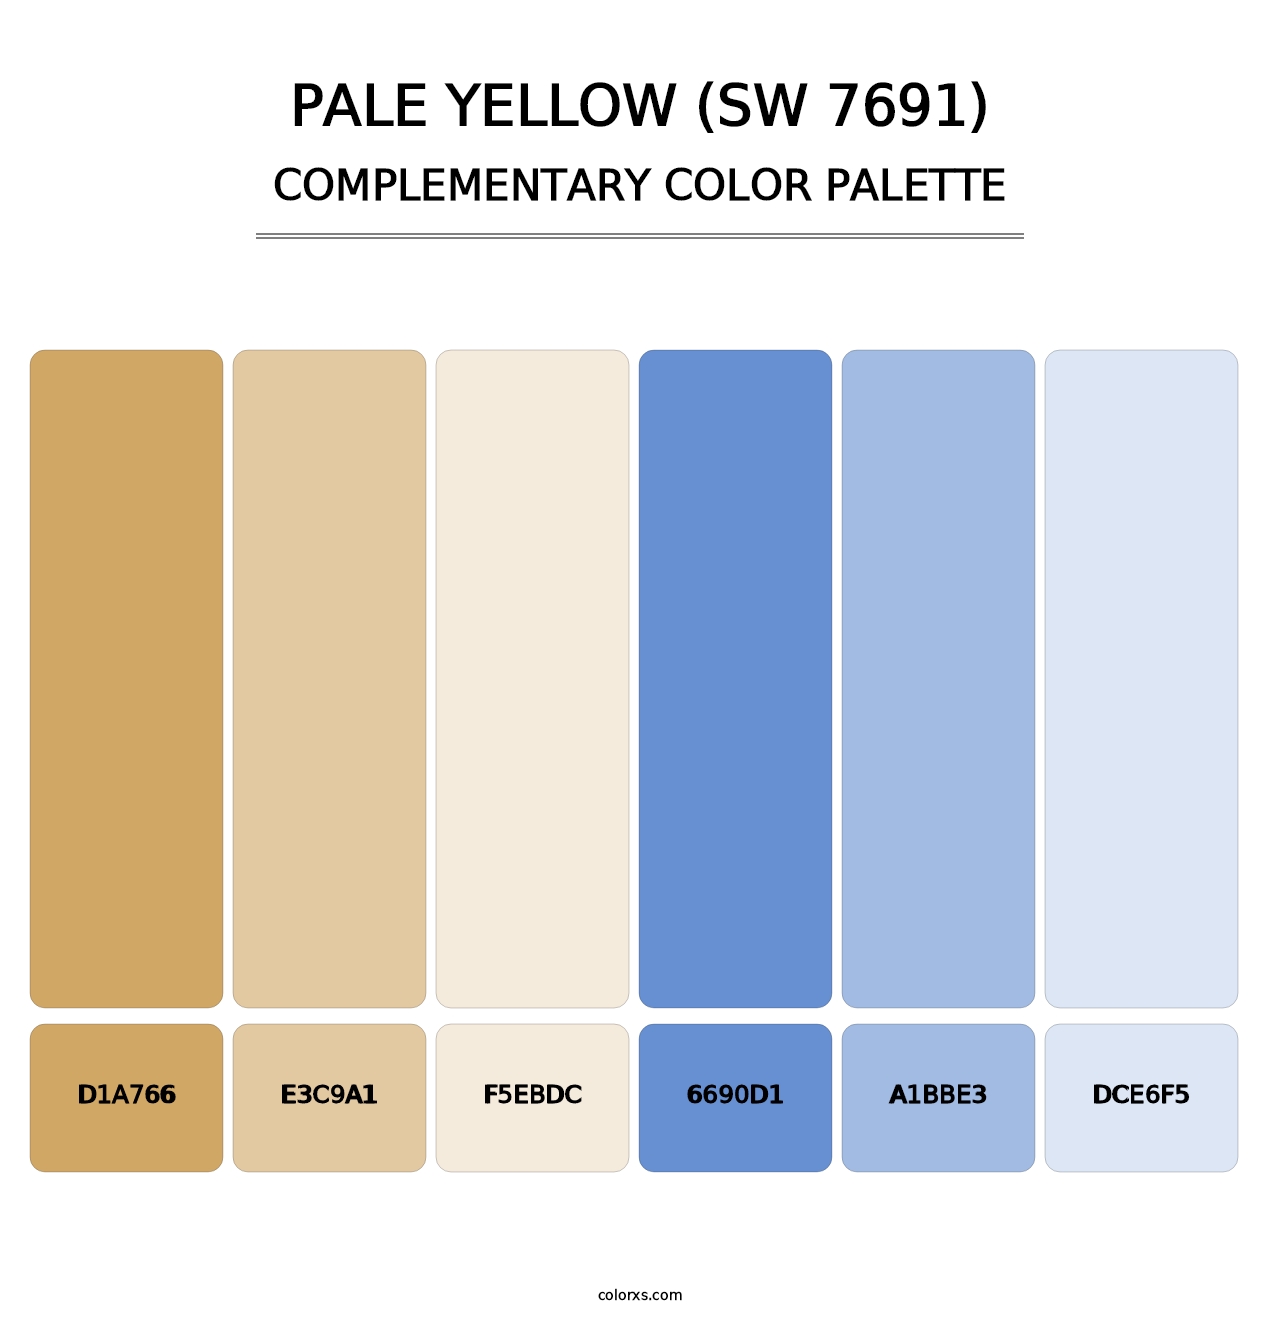 Pale Yellow (SW 7691) - Complementary Color Palette